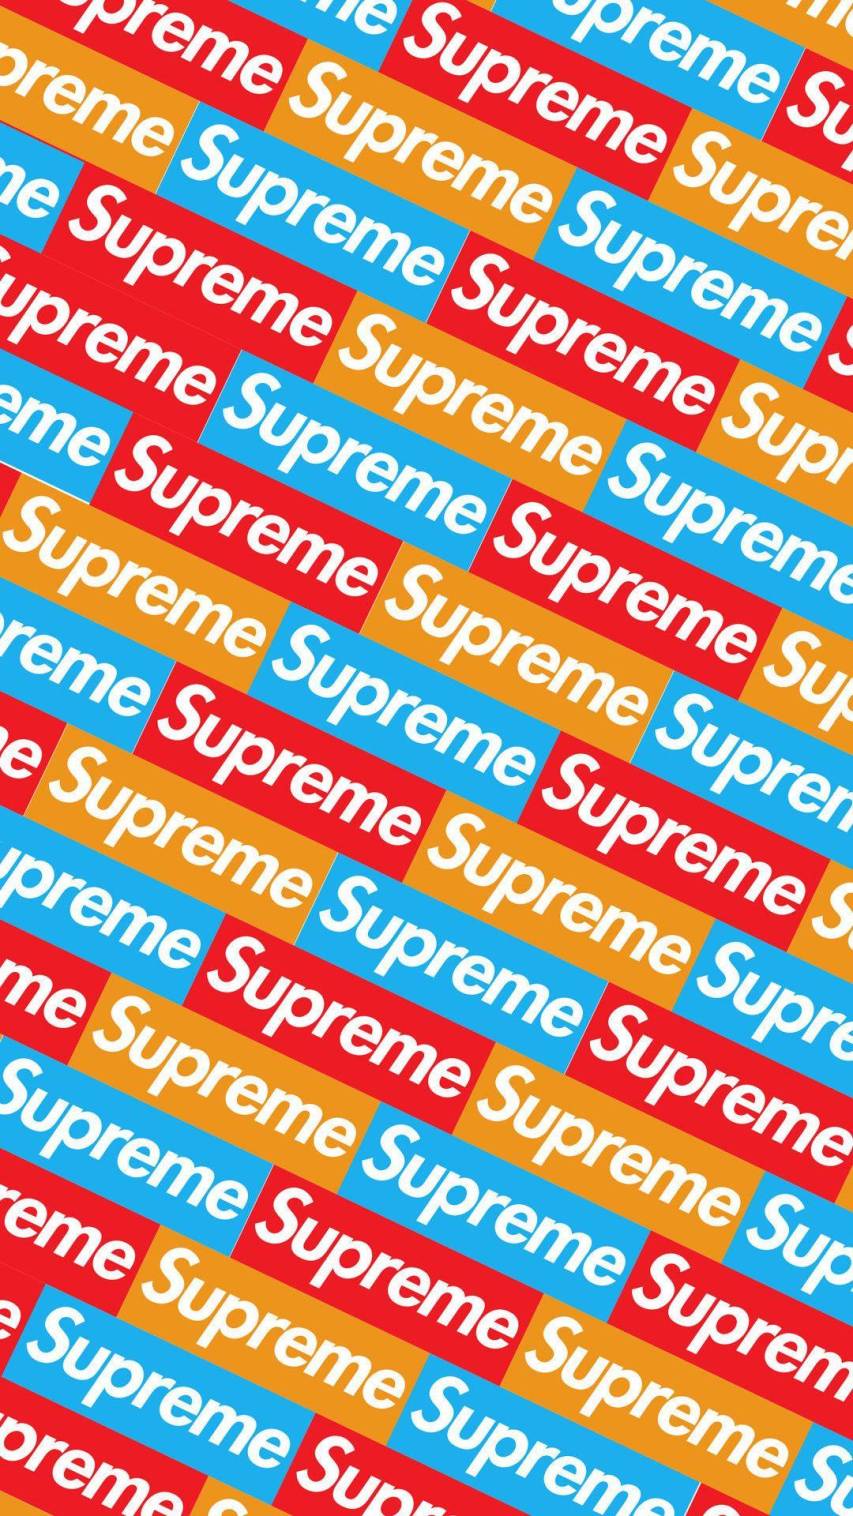 Free Pictures of Supreme iPhone Wallpapers